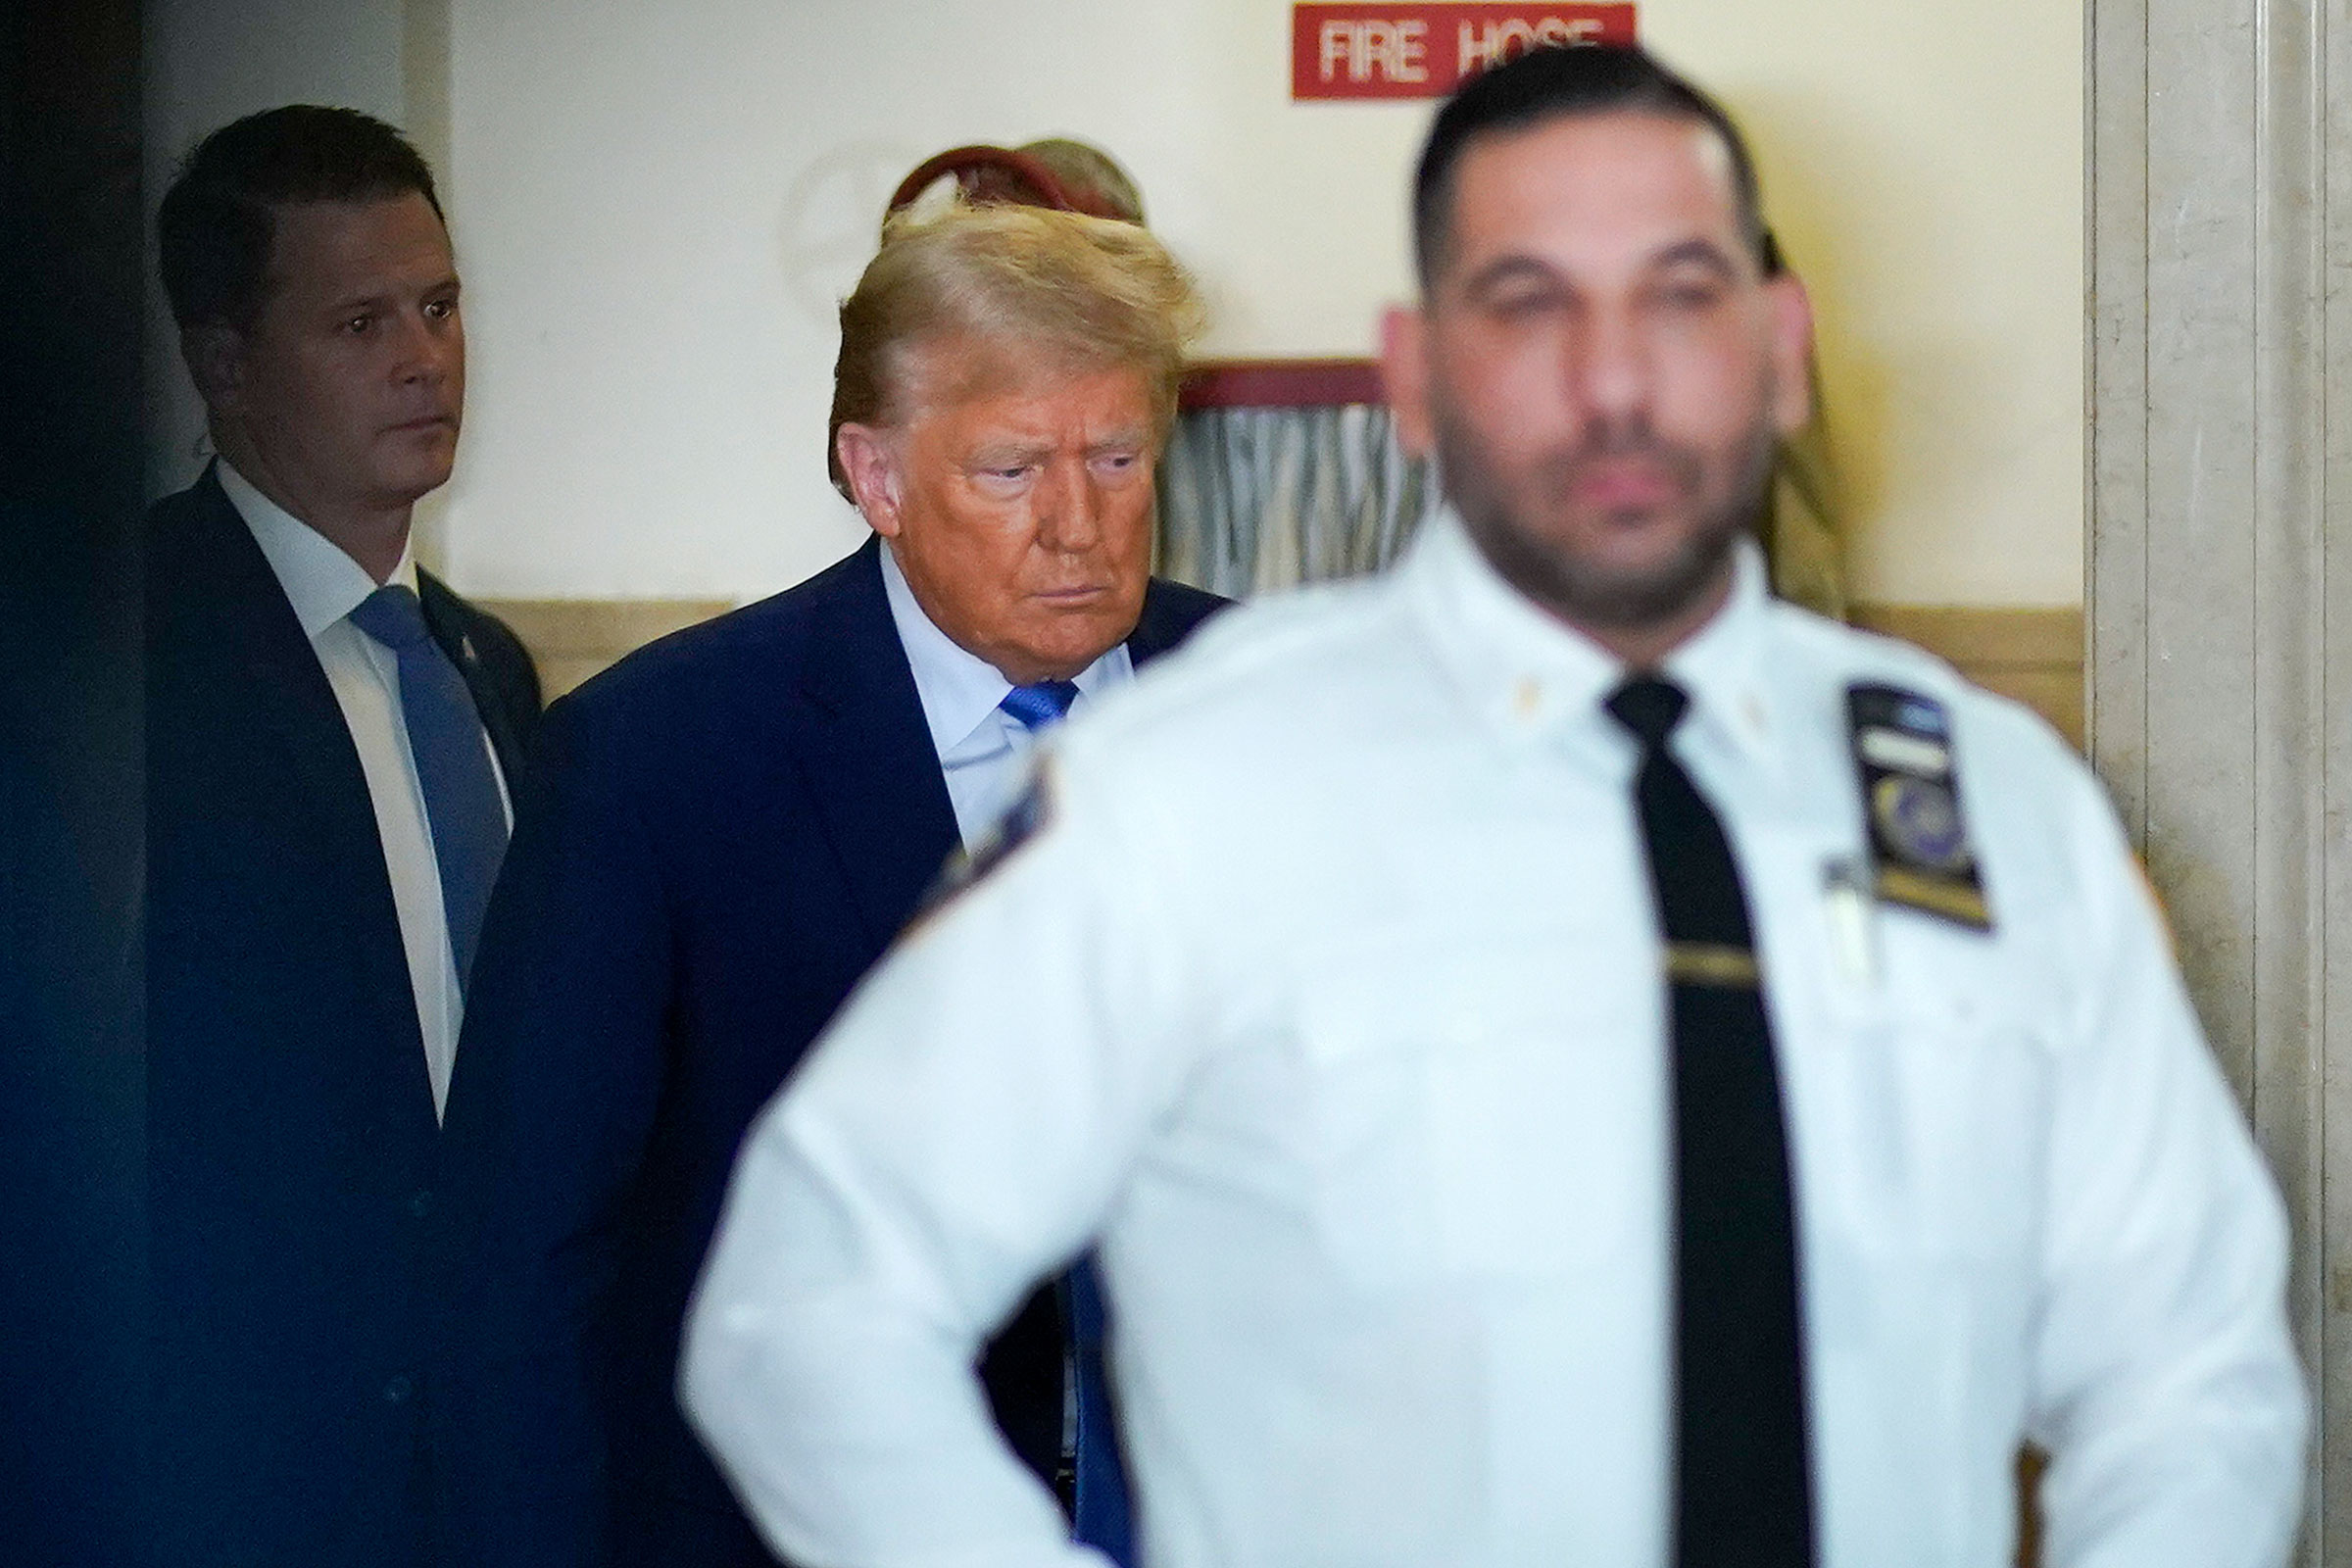 Former President Donald Trump returns to the courtroom after a break in proceedings at New York Supreme Court, Monday, Nov. 6, 2023, in New York.